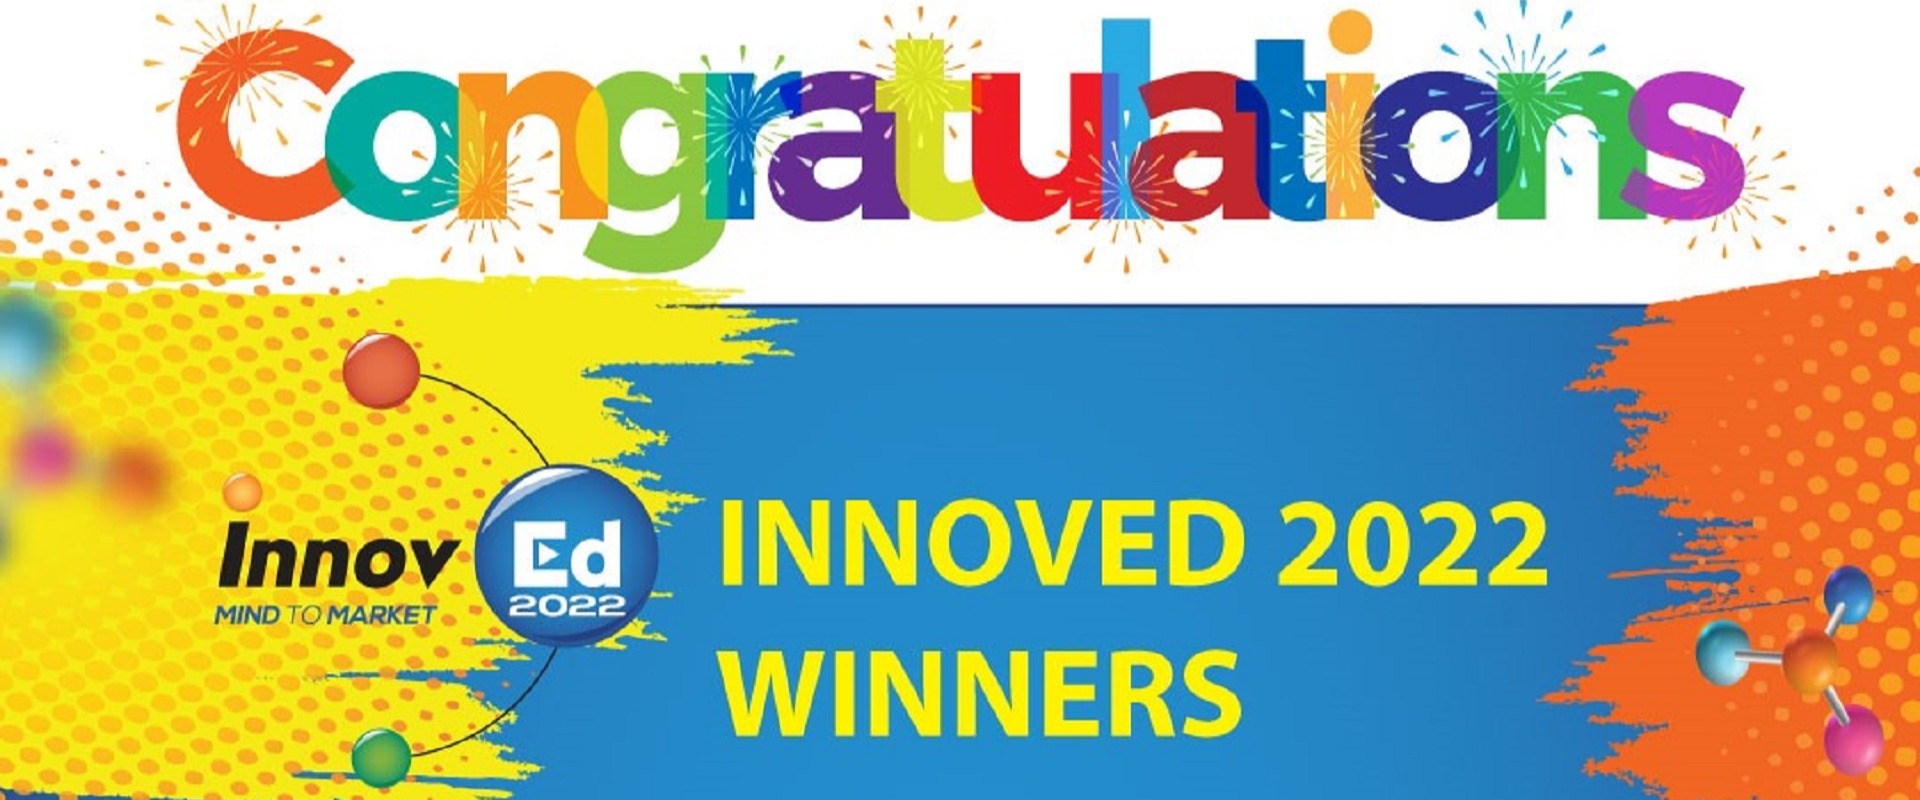 InnovEd 2022 concludes with Innovation and Creativity Webinar and Award Ceremony